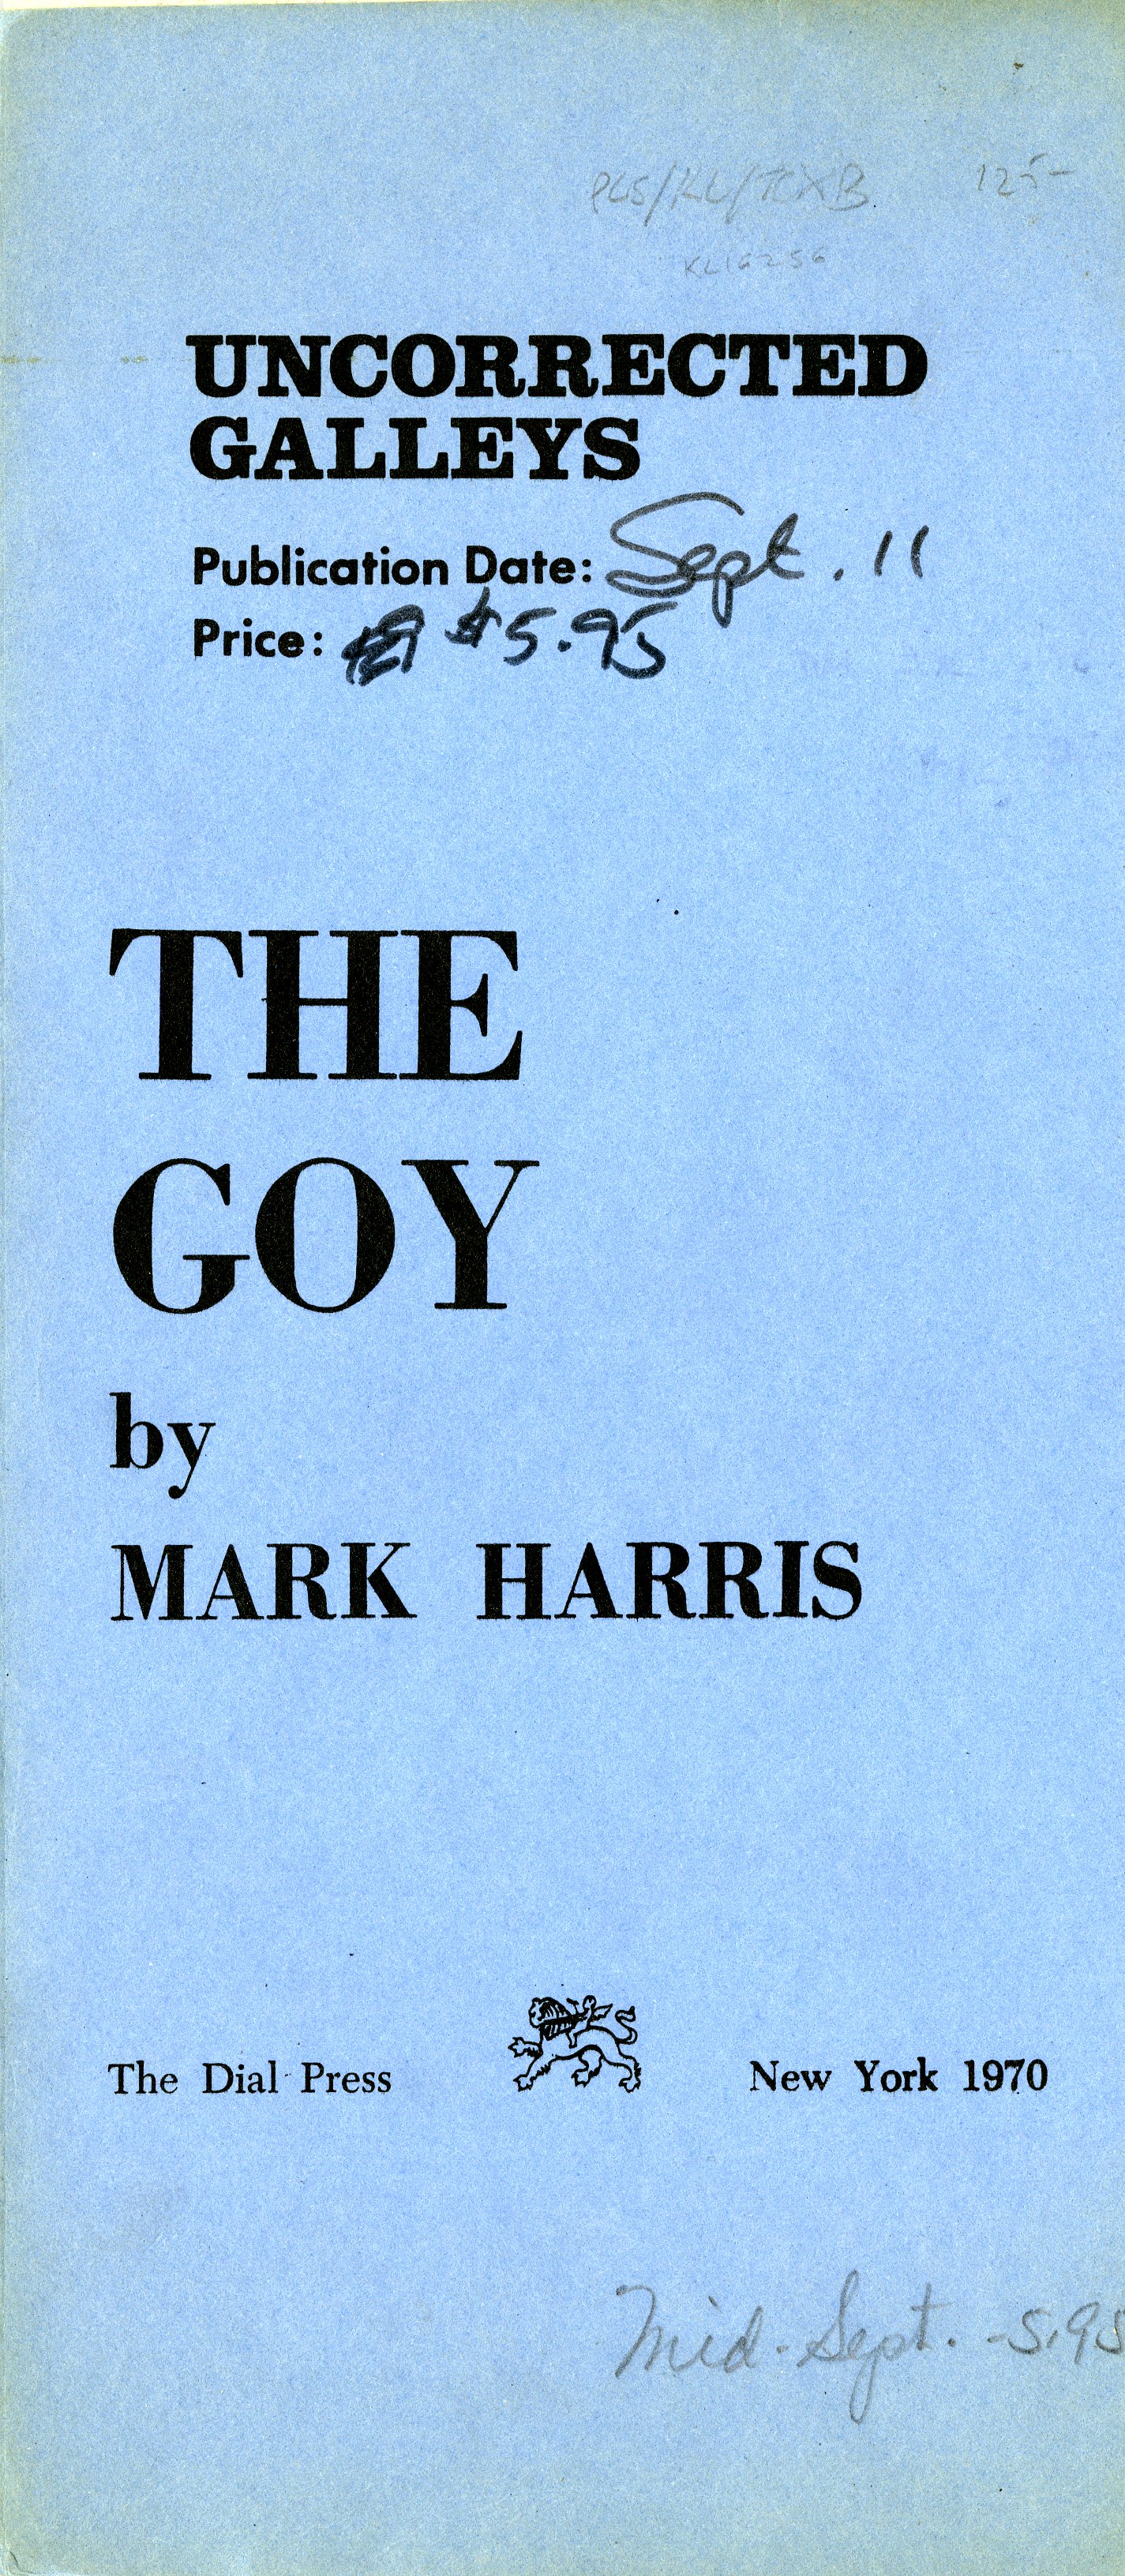 Harris, Mark. The Goy. Uncorrected galleys. Dial Press, publication date September 11, 1970, from the Mark Harris papers